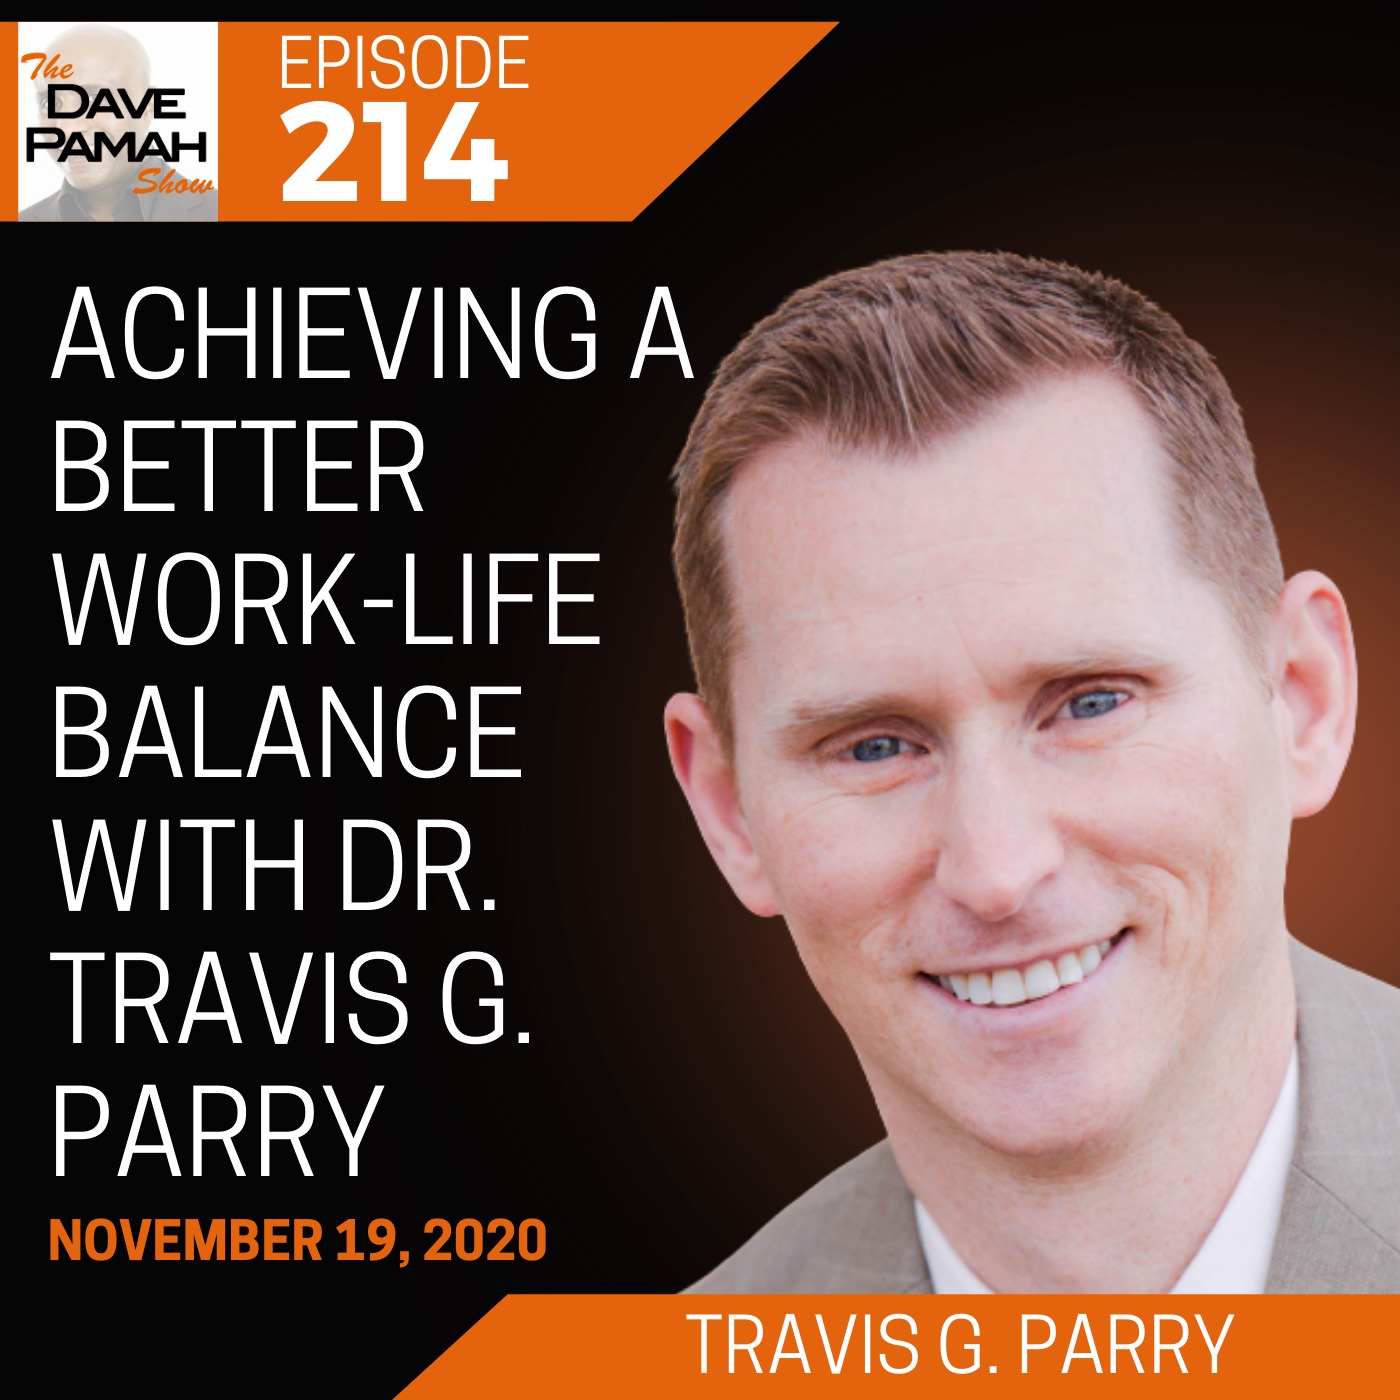 Achieving a better work-life balance with Dr. Travis G. Parry